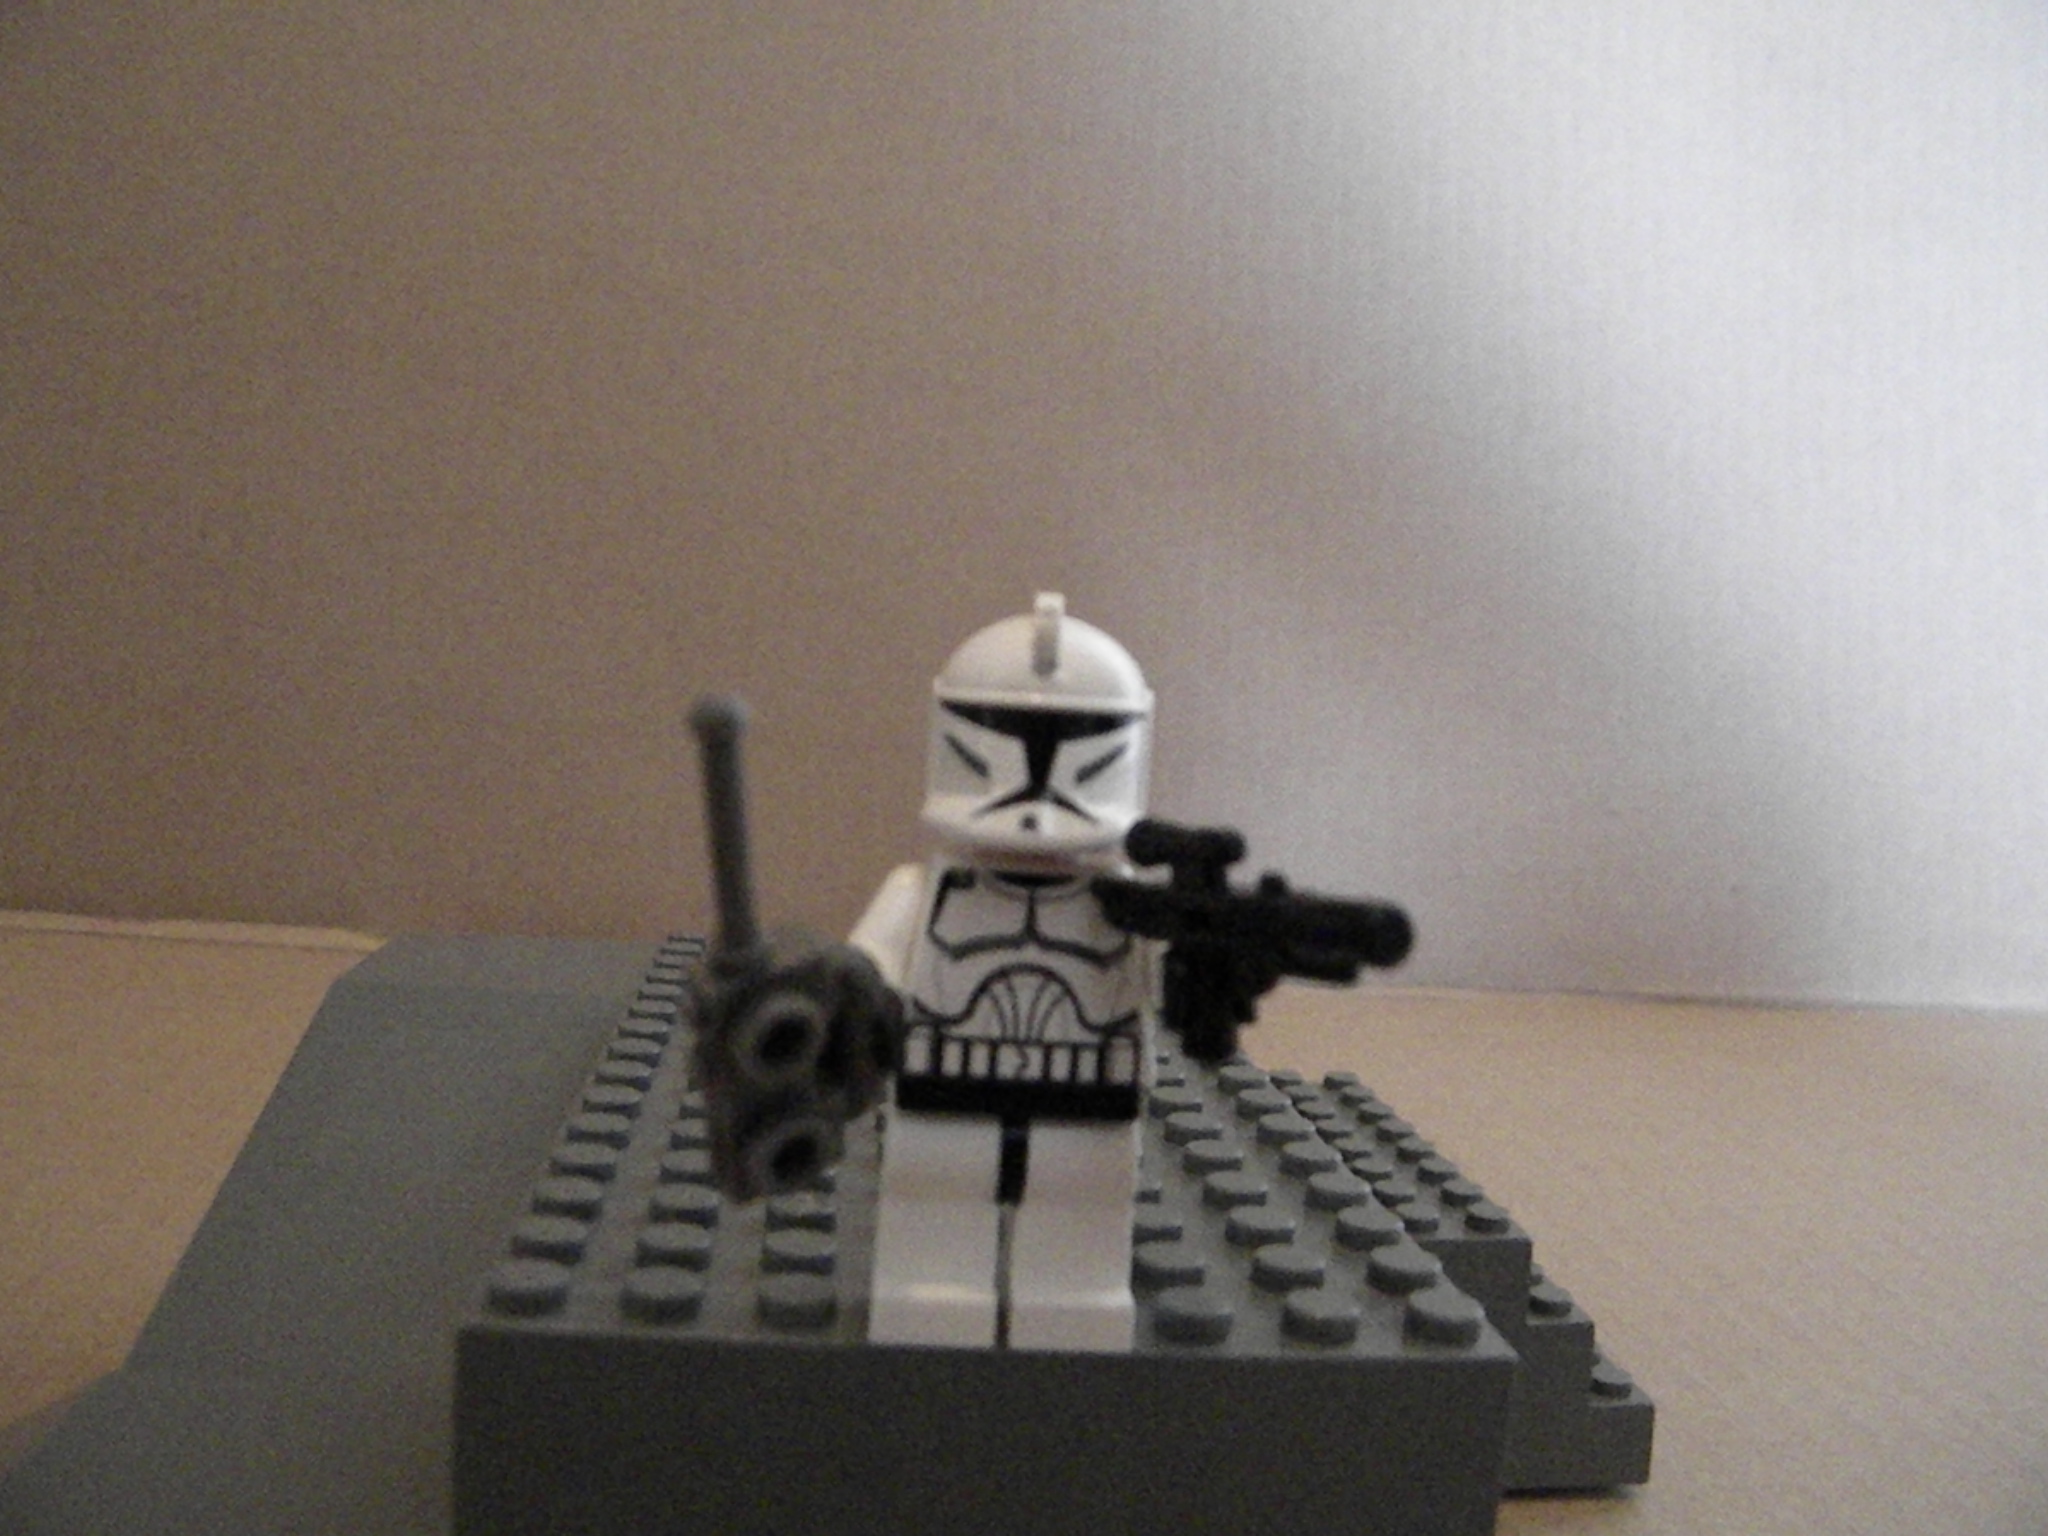 an lego storm trooper is holding a weapon